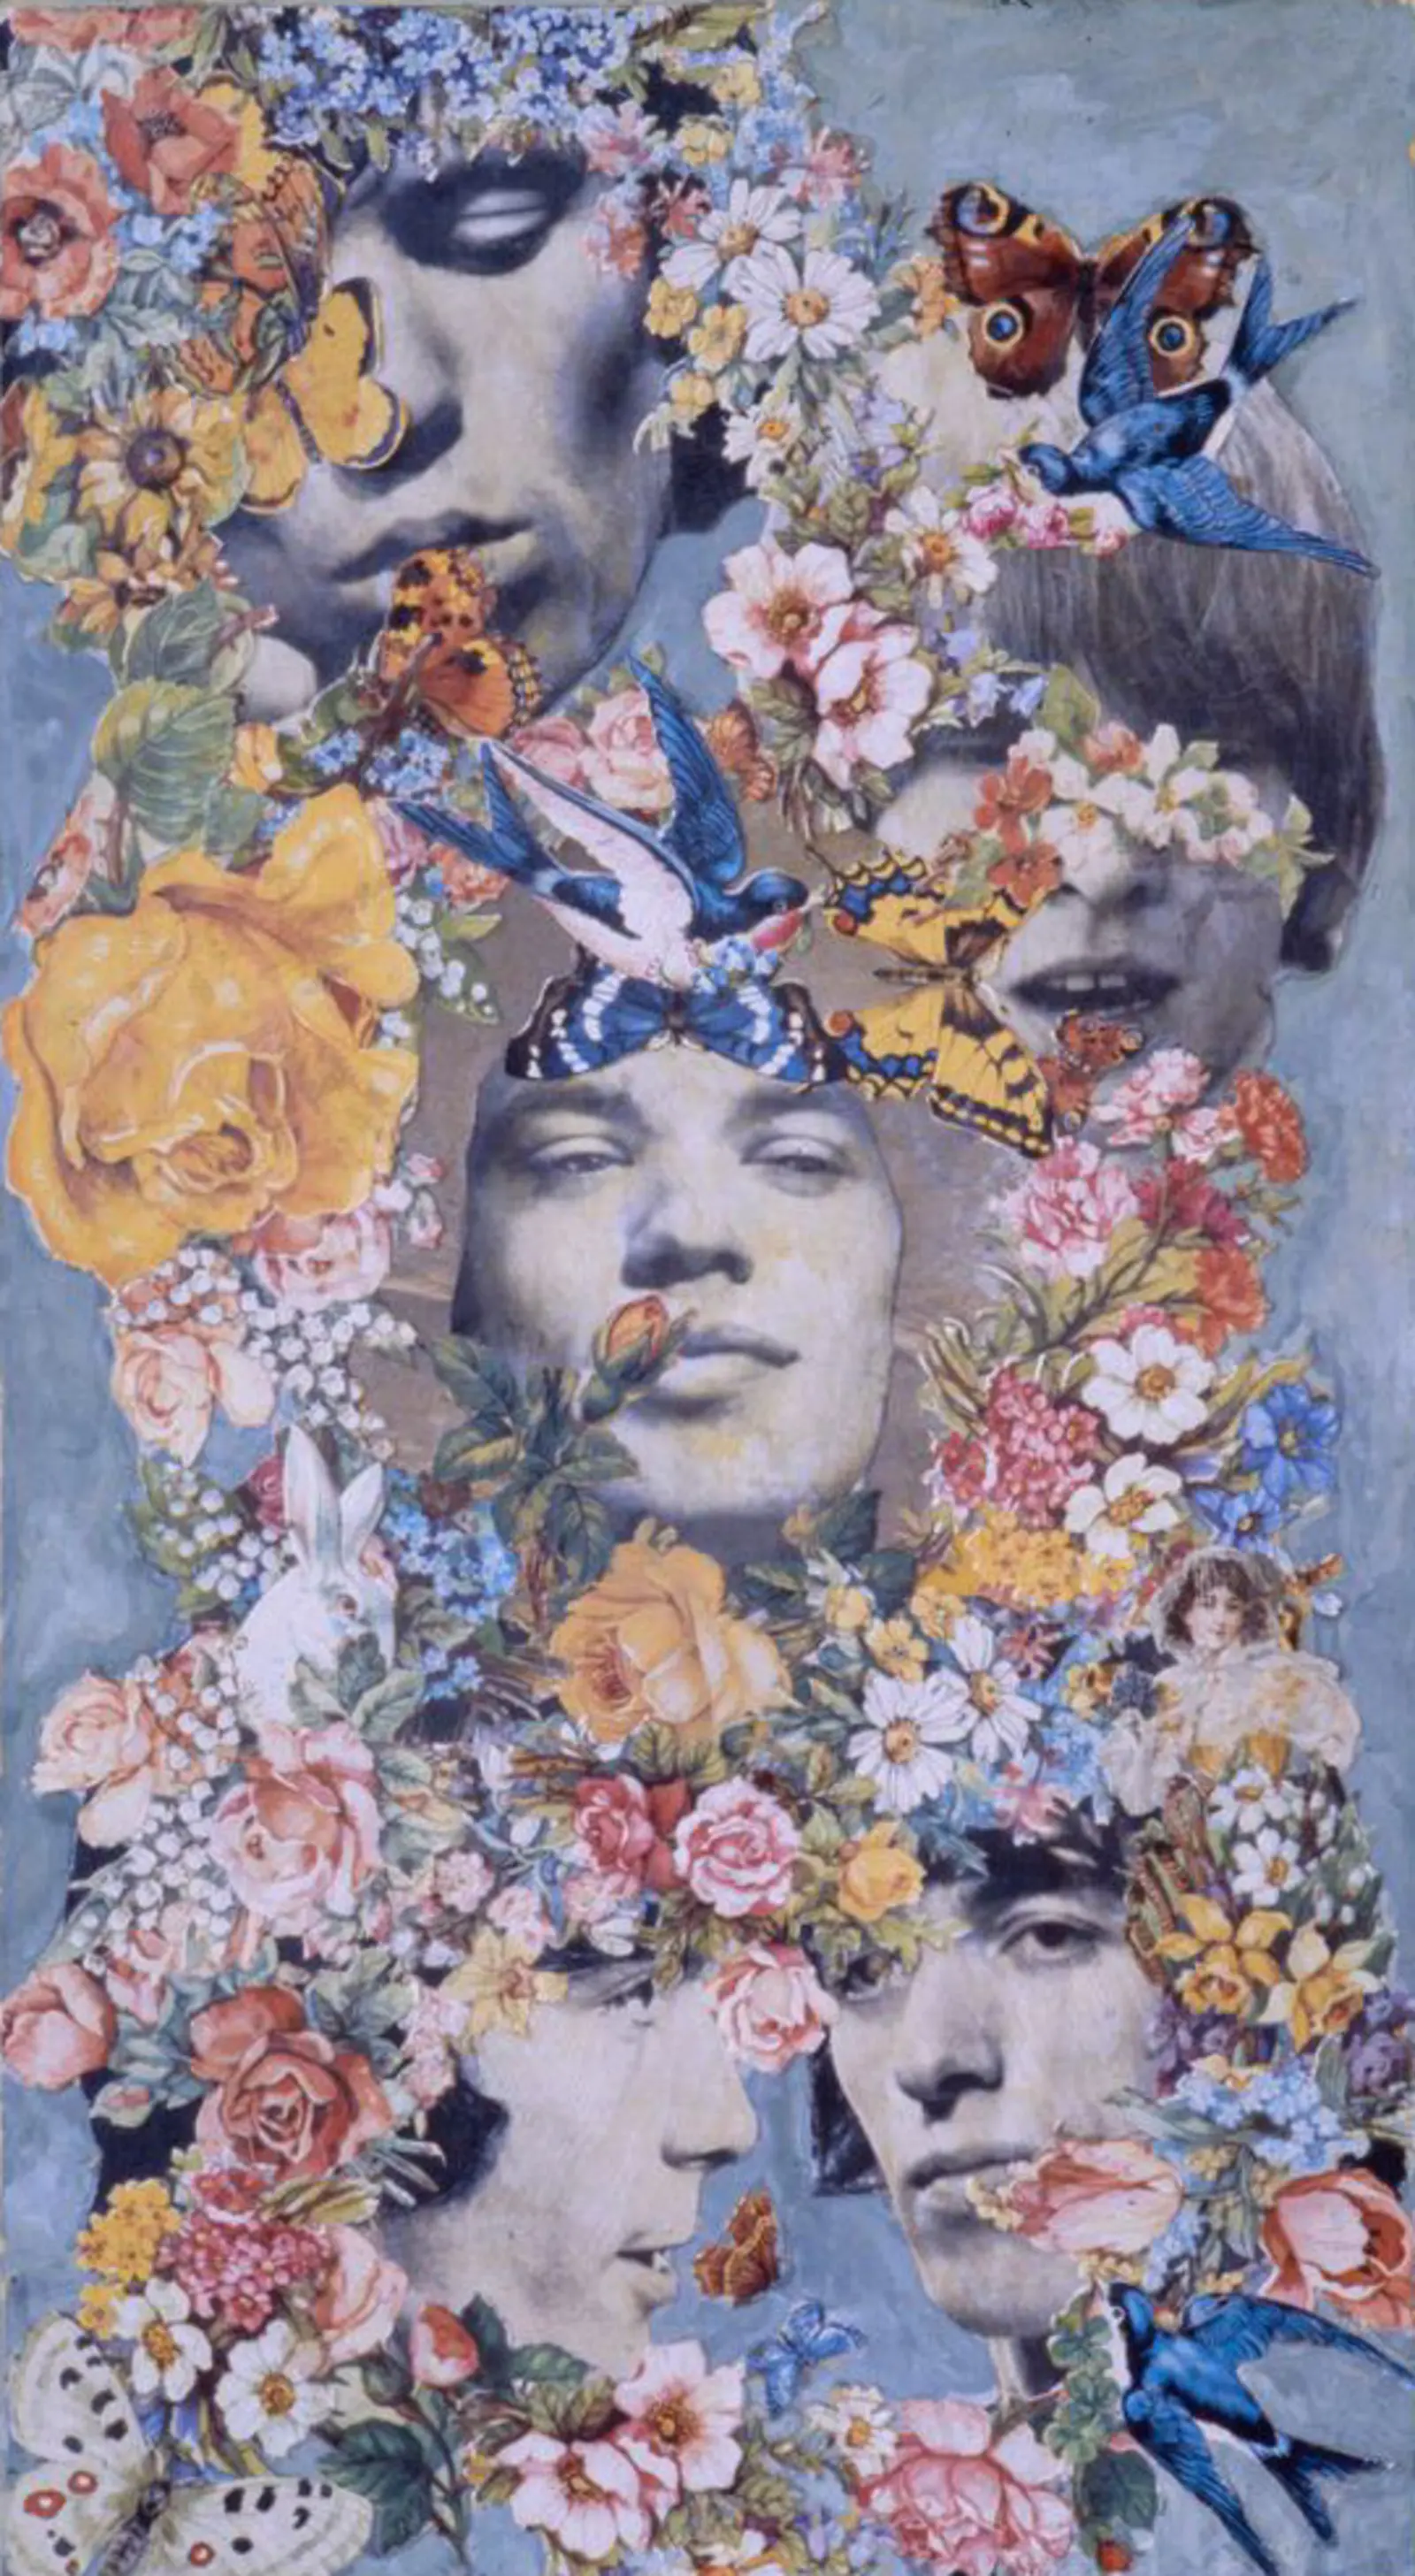 A collage featuring the members of the Rolling Stones surrounded by flowers, birds, and butterflies.